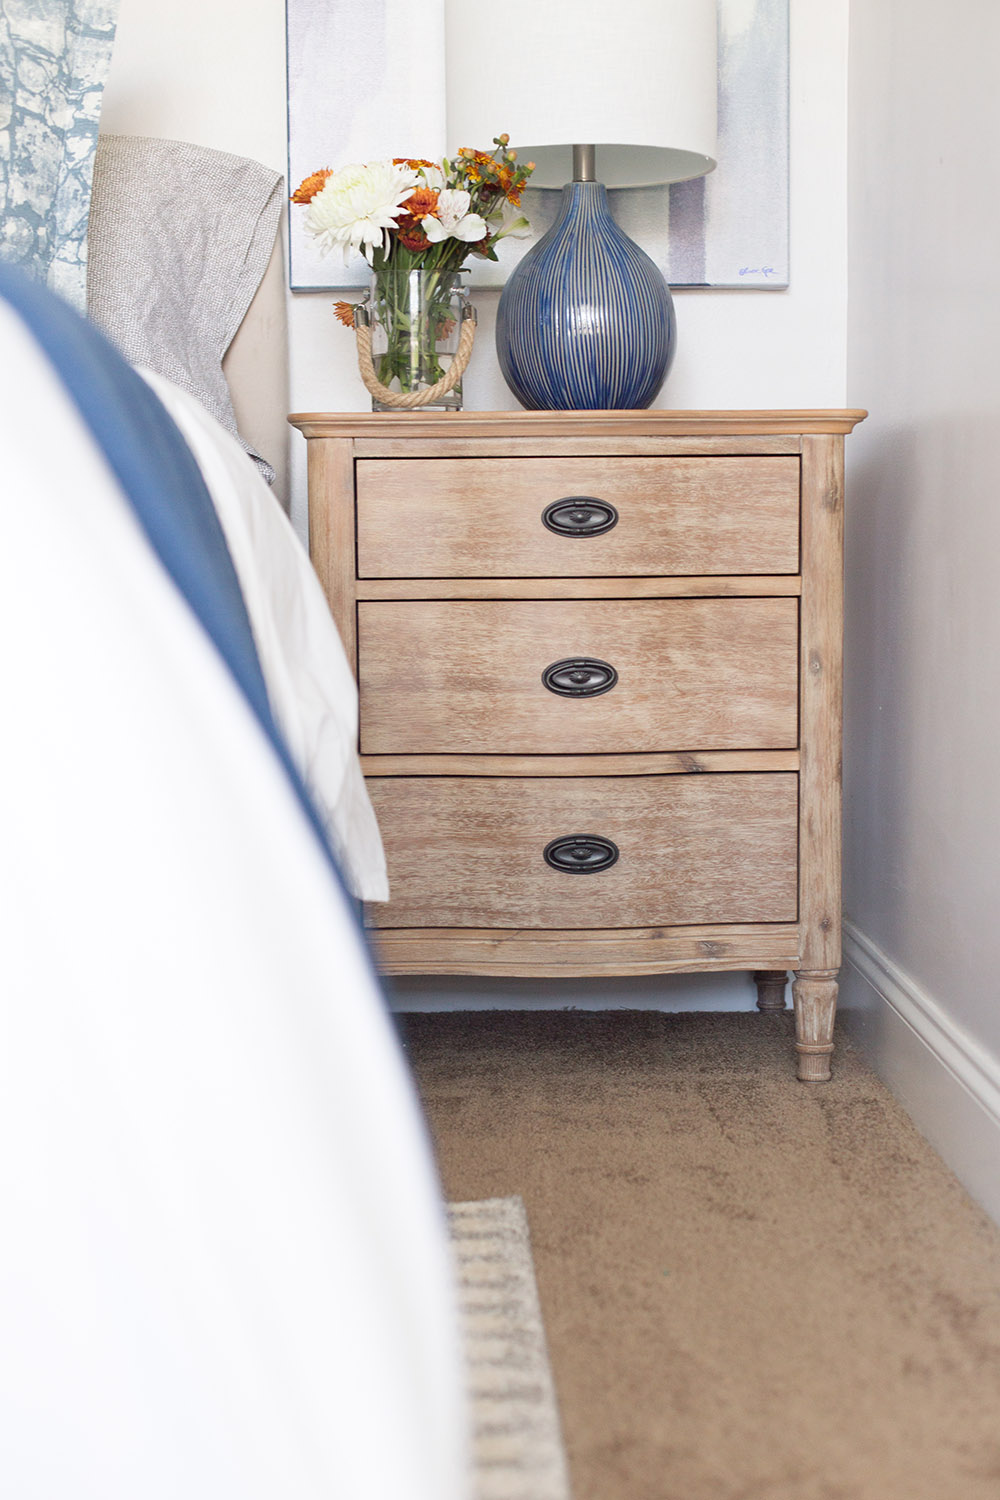 A vase of flowers and a blue lamp decorate a nightstand with three drawers.